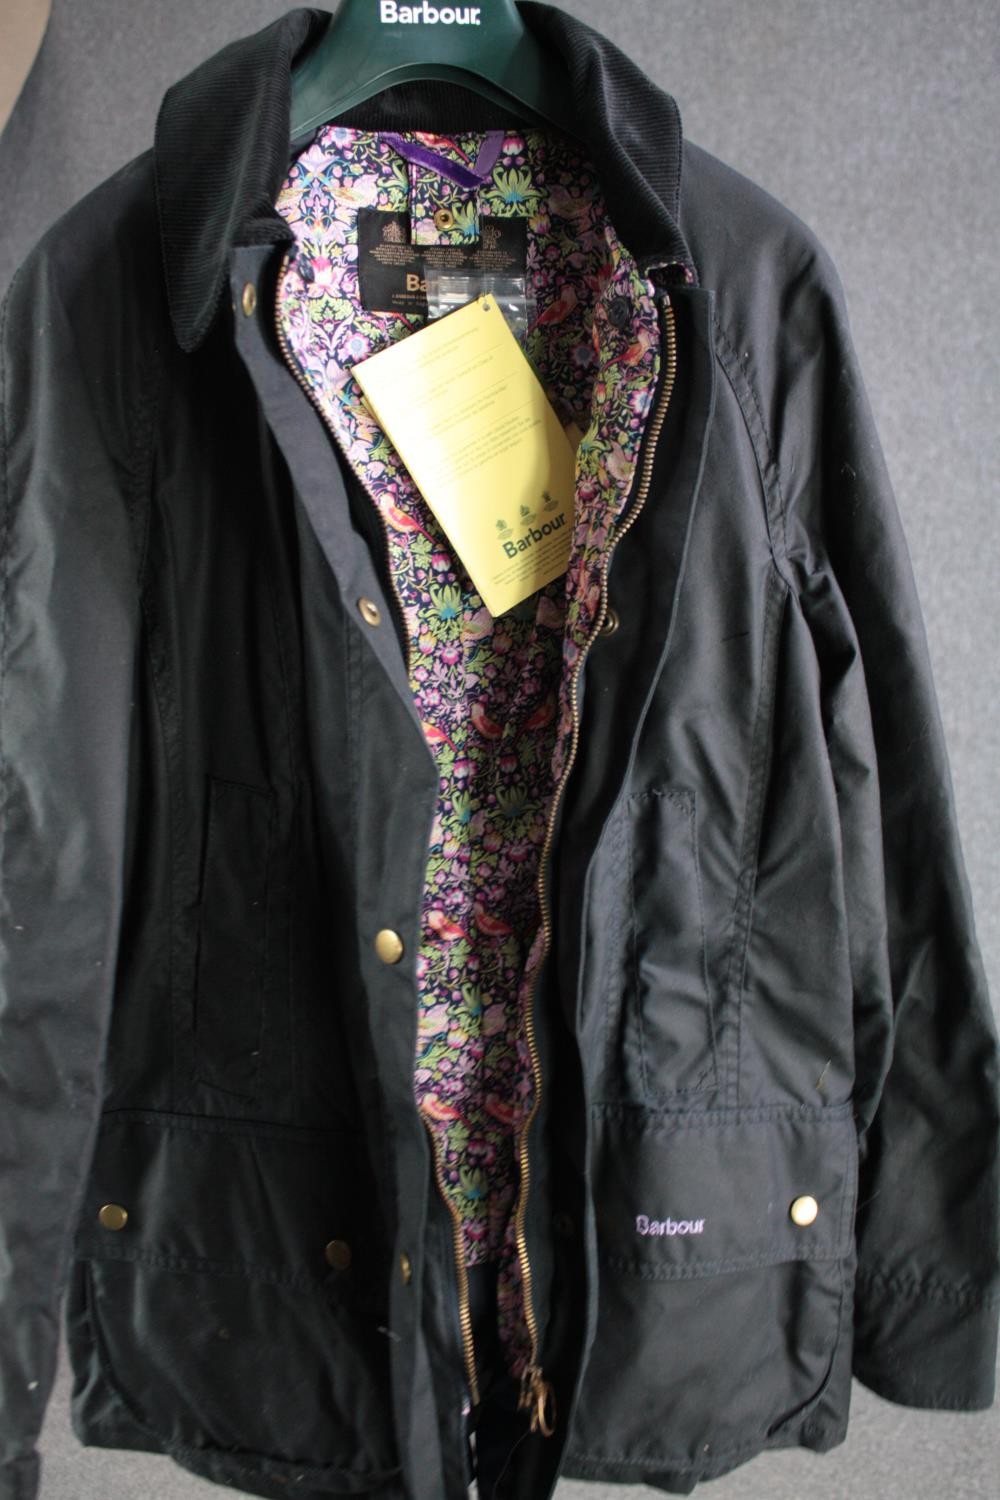 Women's Barbour jacket. UK size 10 with a paisley lining. - Image 3 of 6